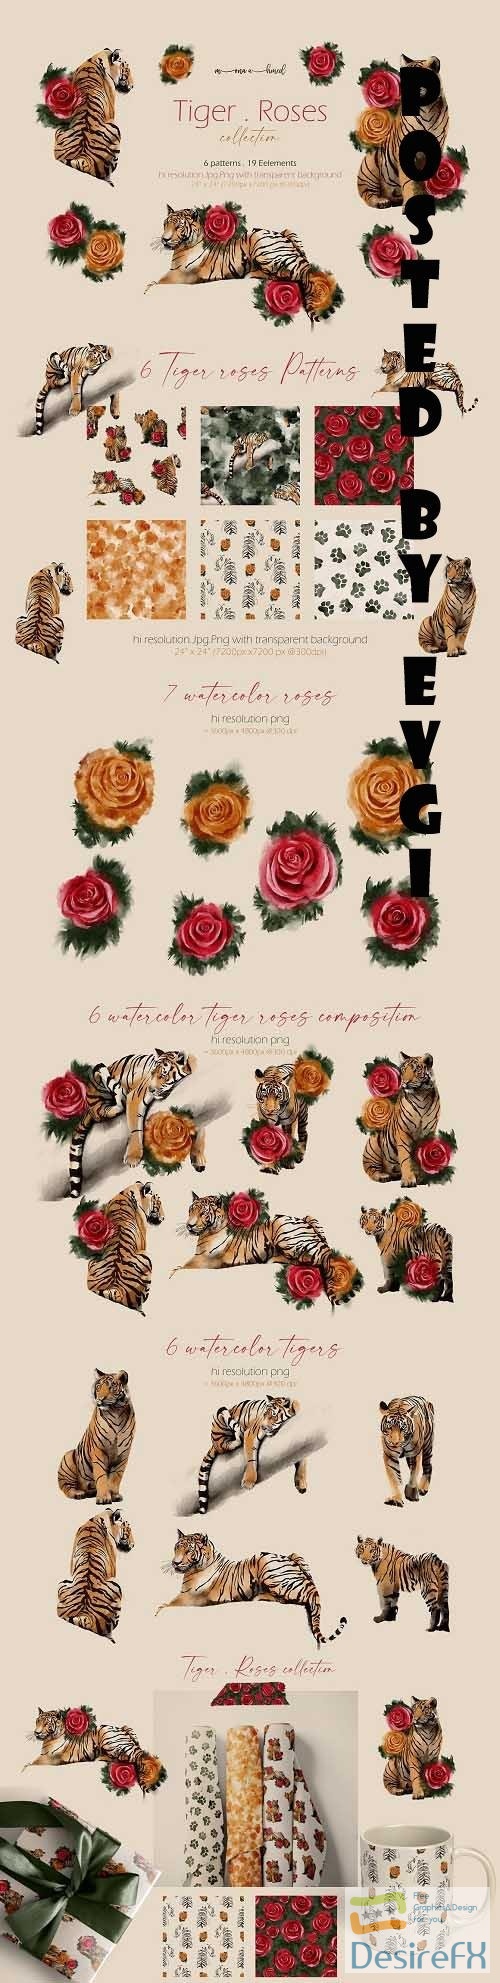 Tigers & Roses watercolor collection - 6941142